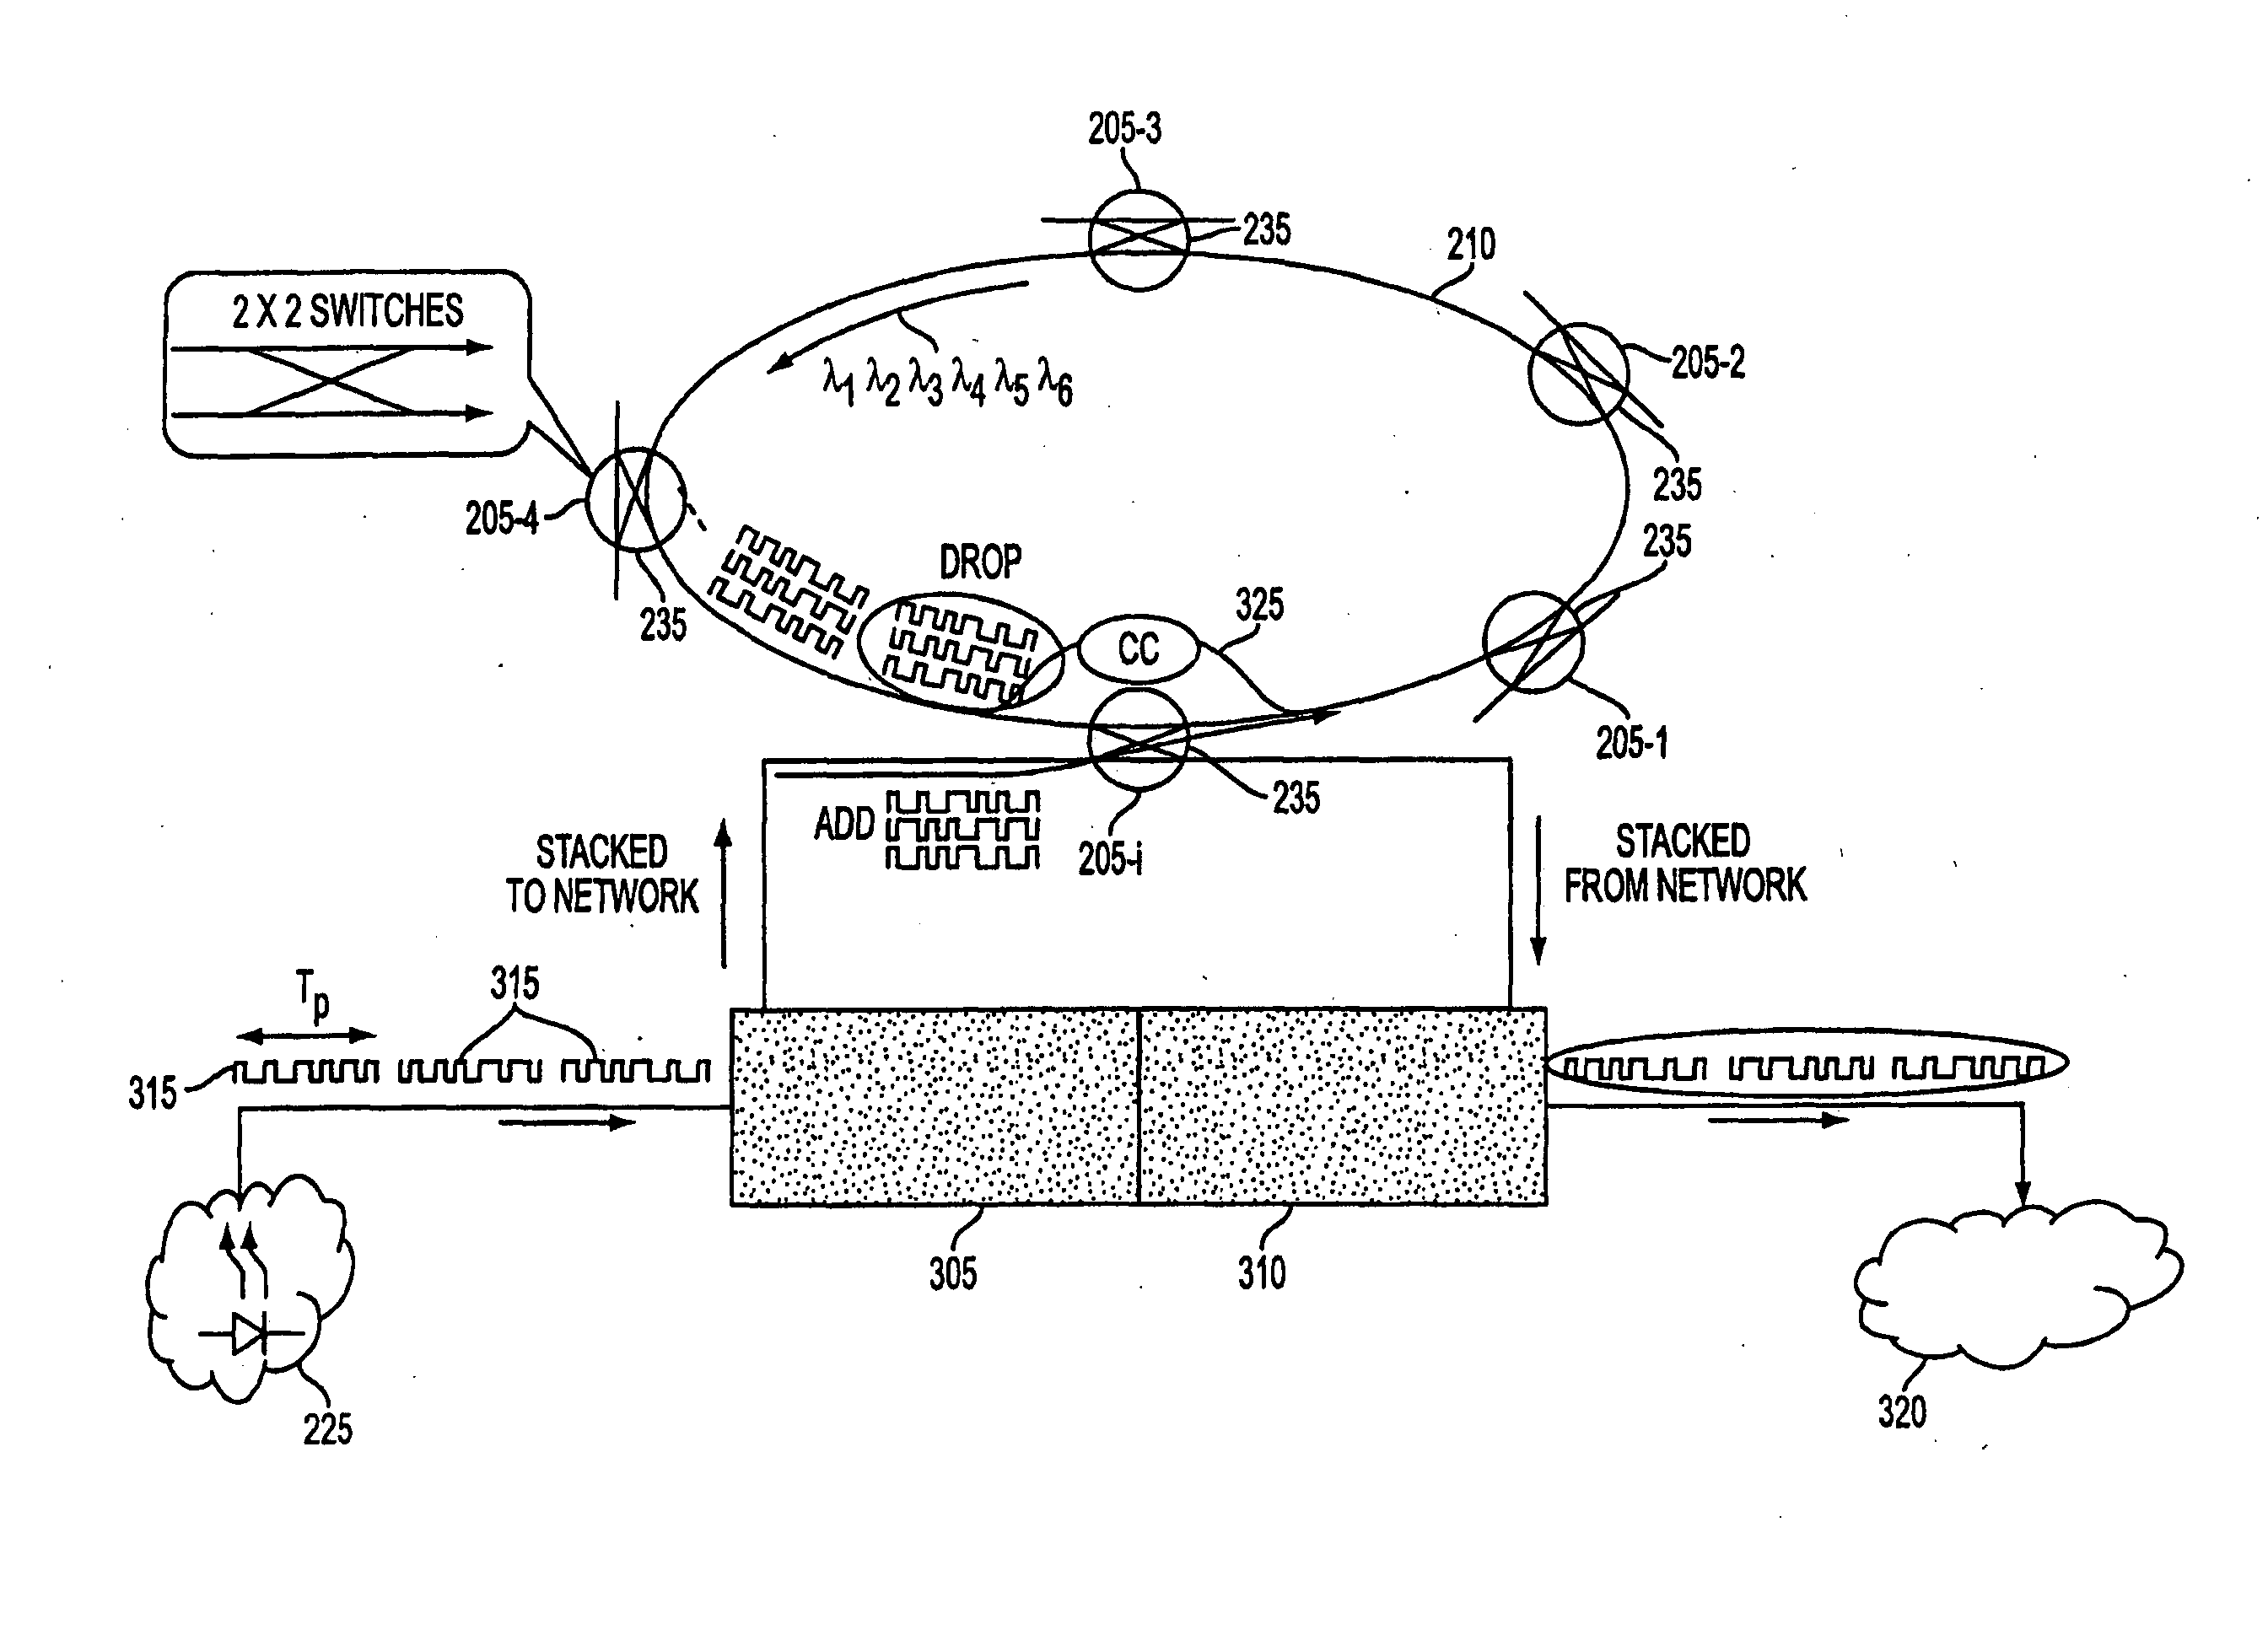 Method for composite packet-switching over WDM by transparent photonic slot routing